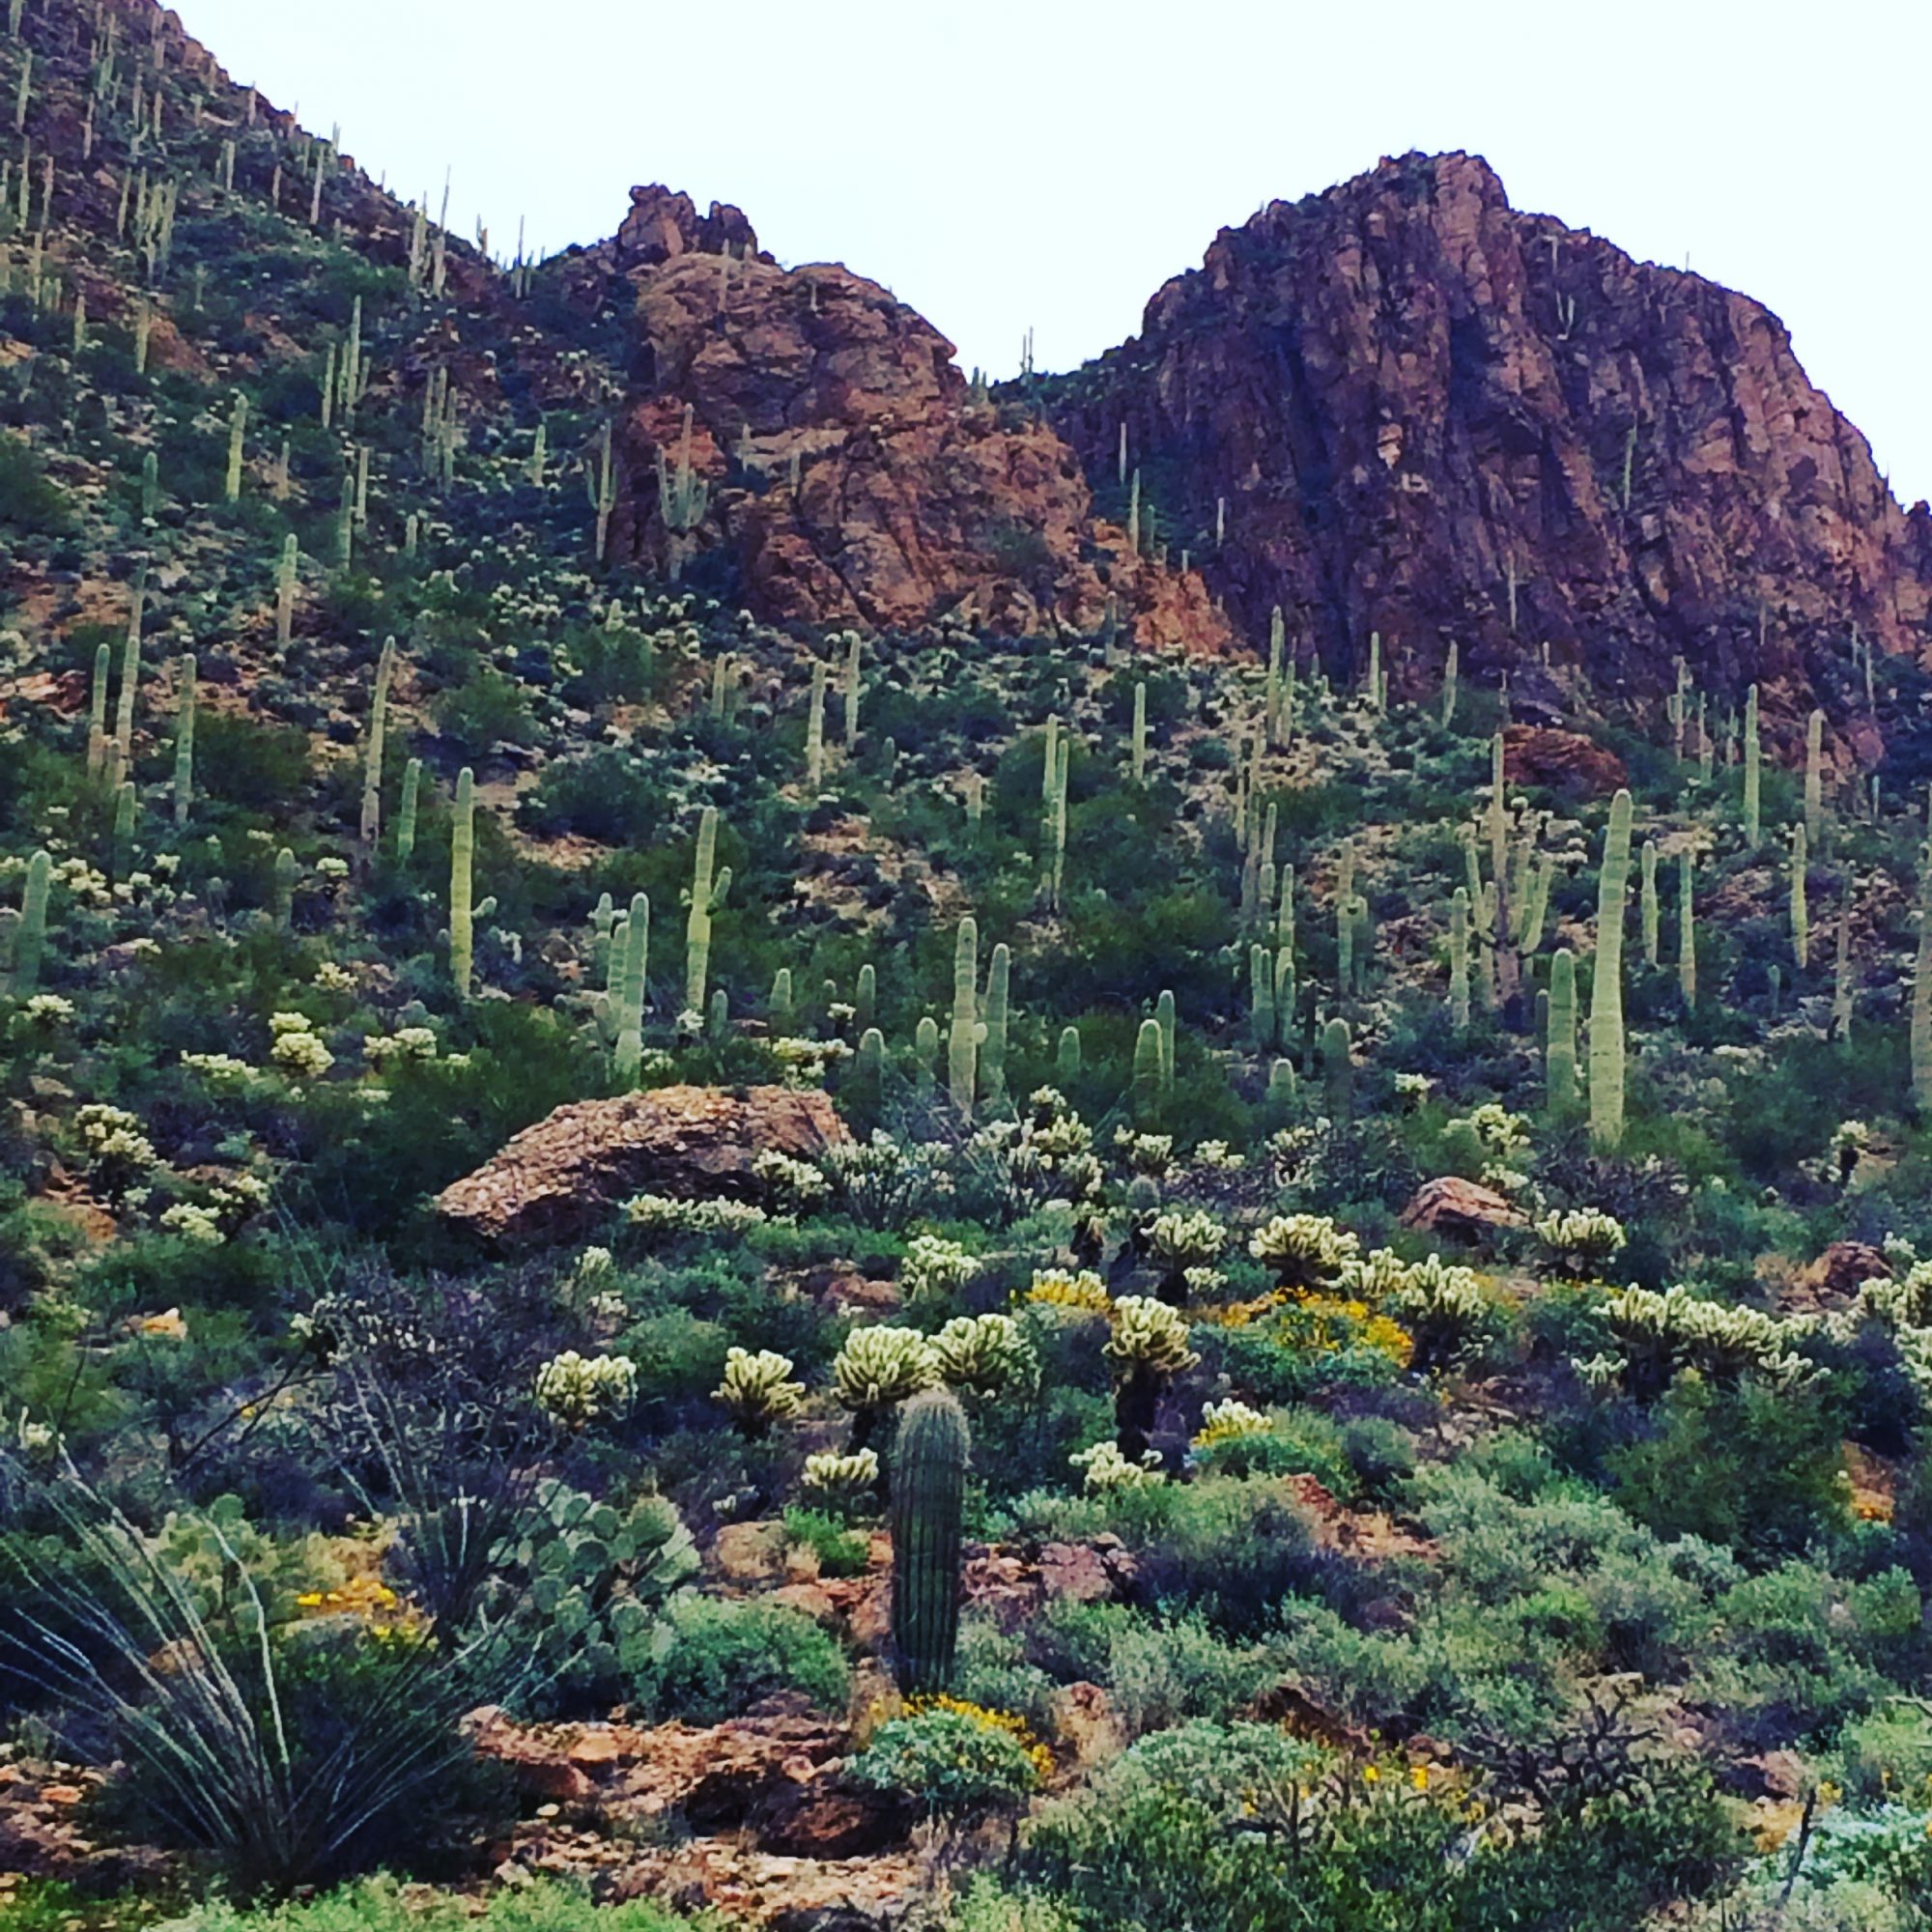 Hillside in the Sonoran Desert covered by saguaro cactus and flowering shrubs.